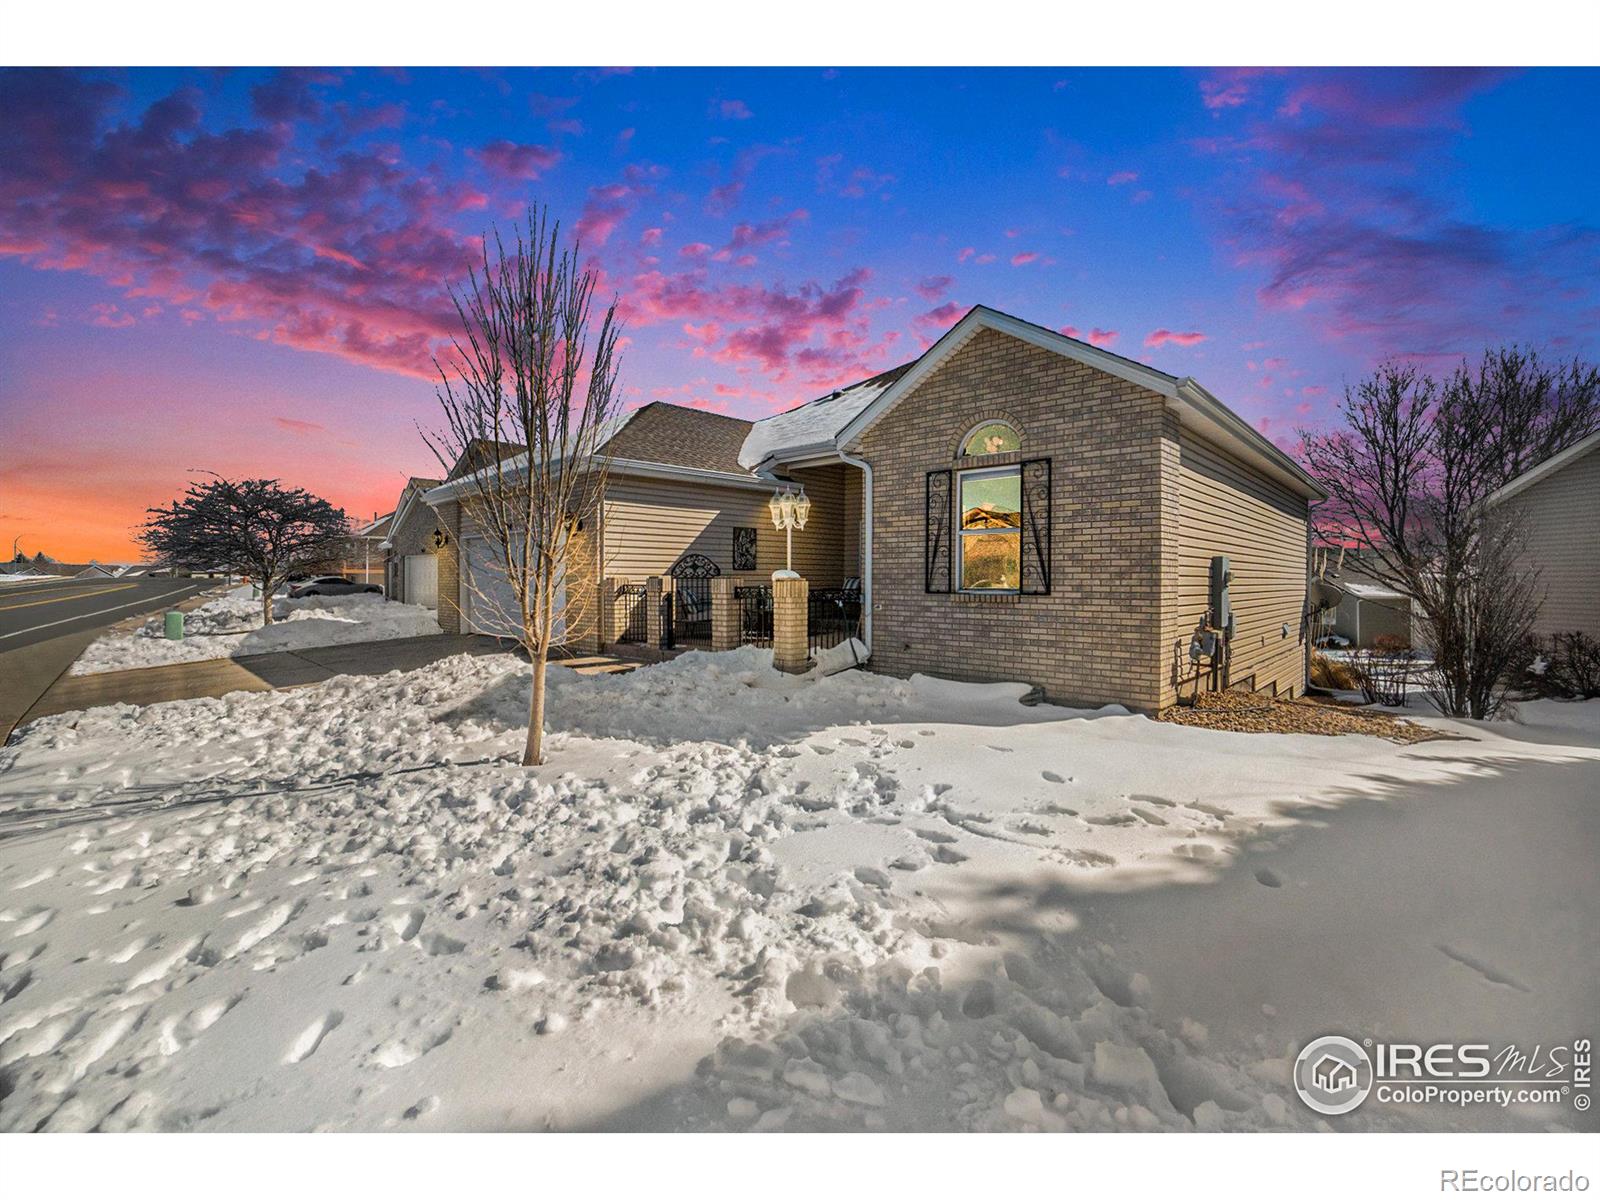 CMA Image for 642  54th ave ct,Greeley, Colorado